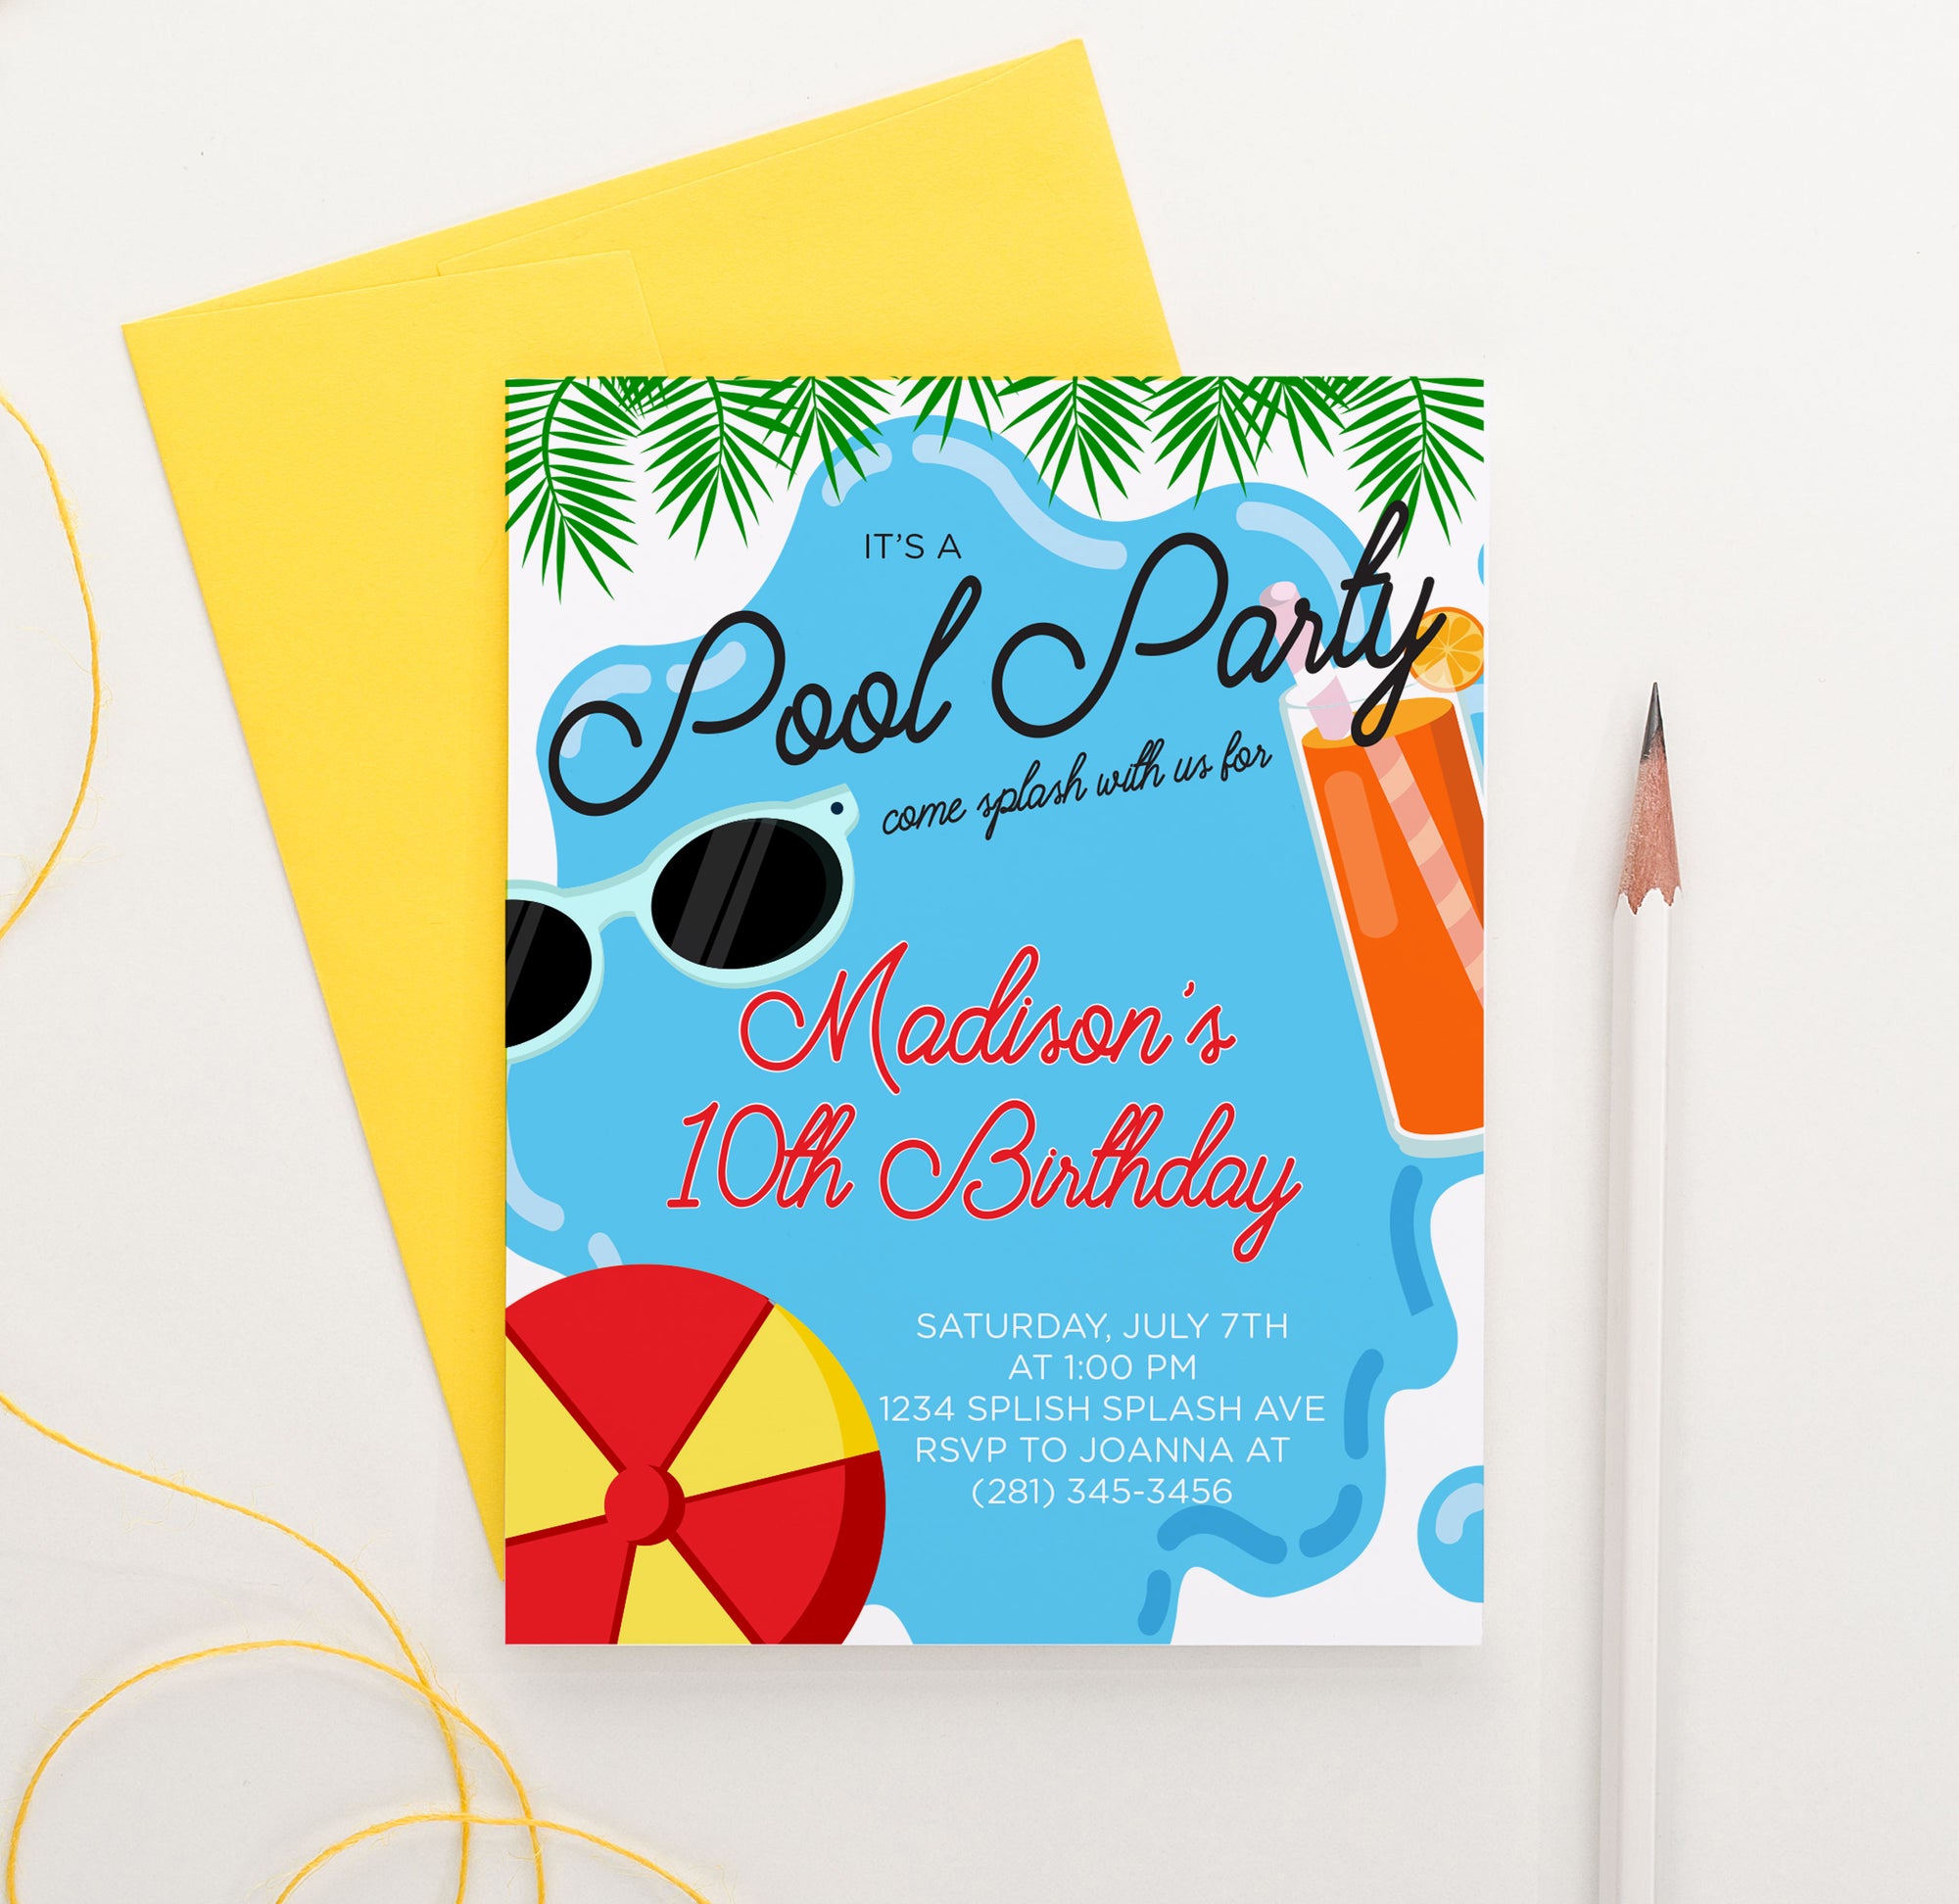 Personalized Pool Party Birthday Invitations